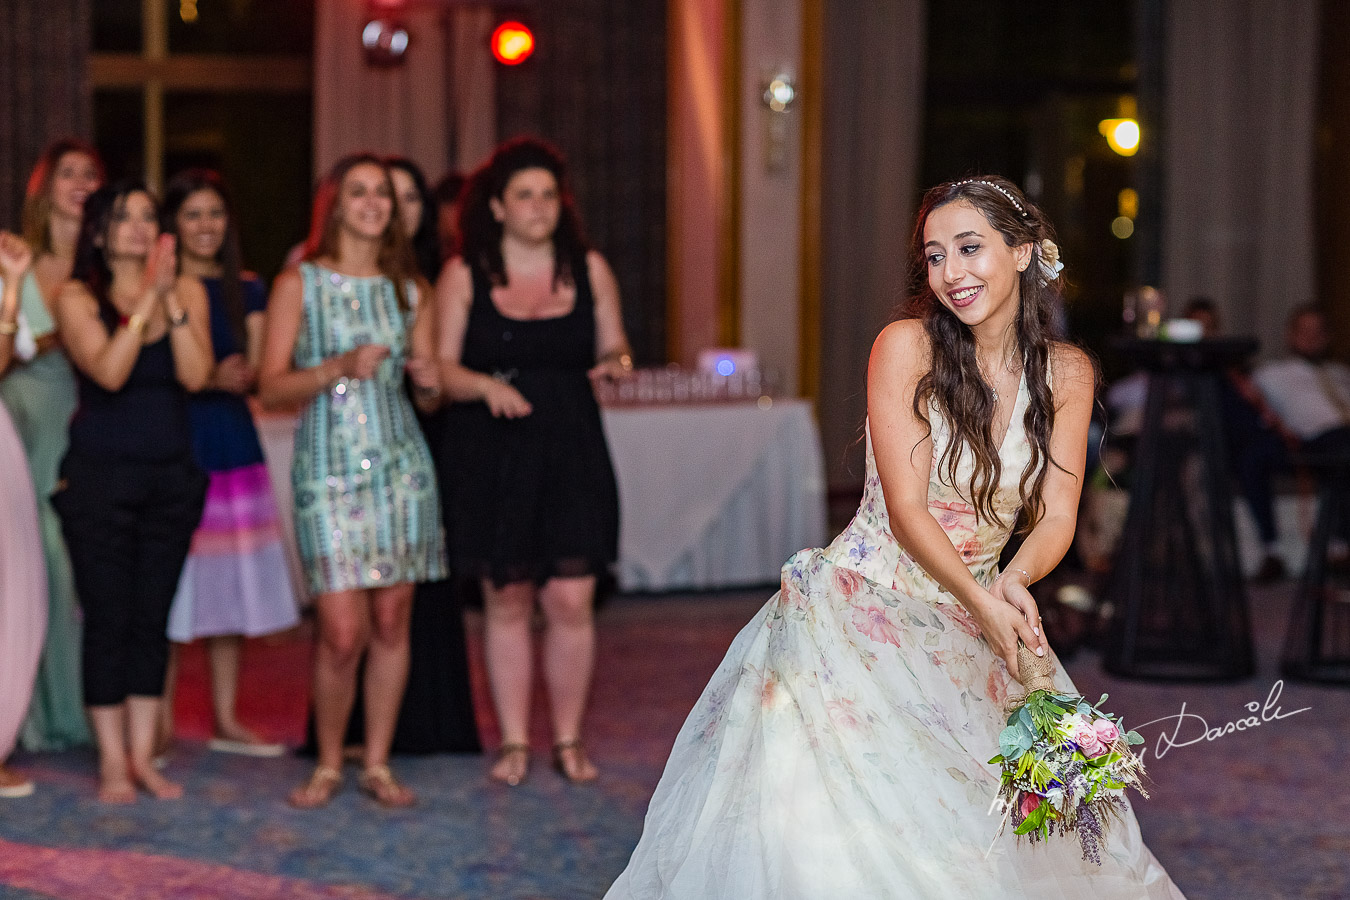 Bride tossing the bouqet photographed as part of an Exclusive Wedding photography at Grand Resort Limassol, captured by Cyprus Wedding Photographer Cristian Dascalu.